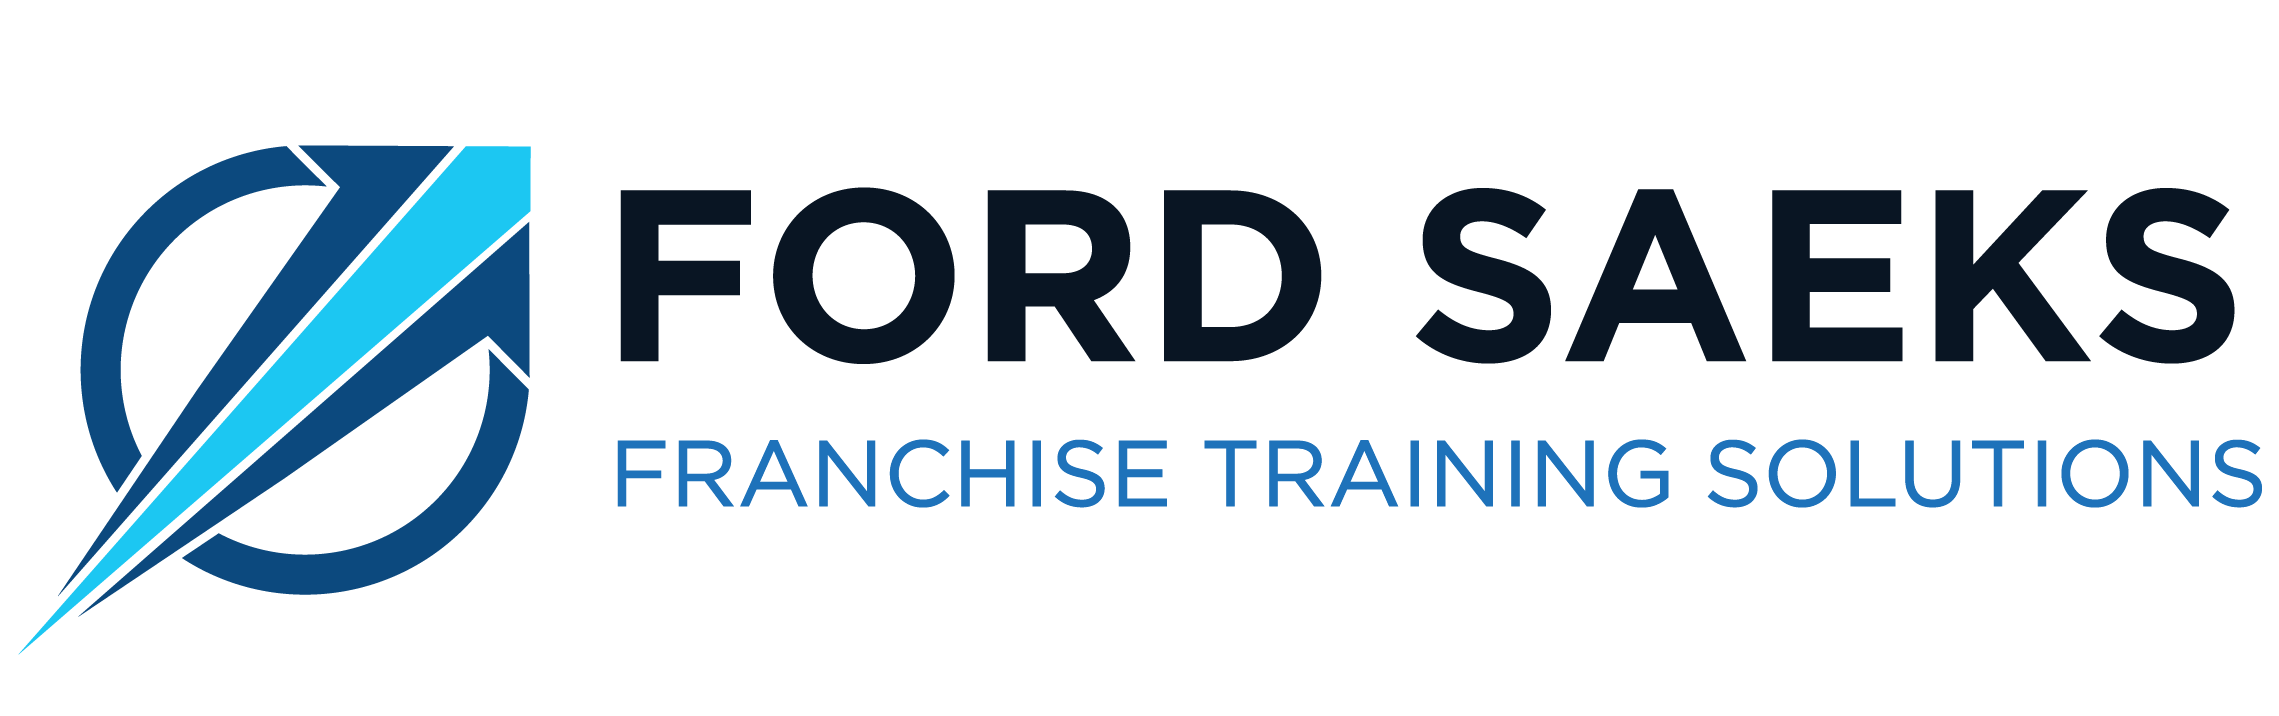 Franchise Training Solutions-04